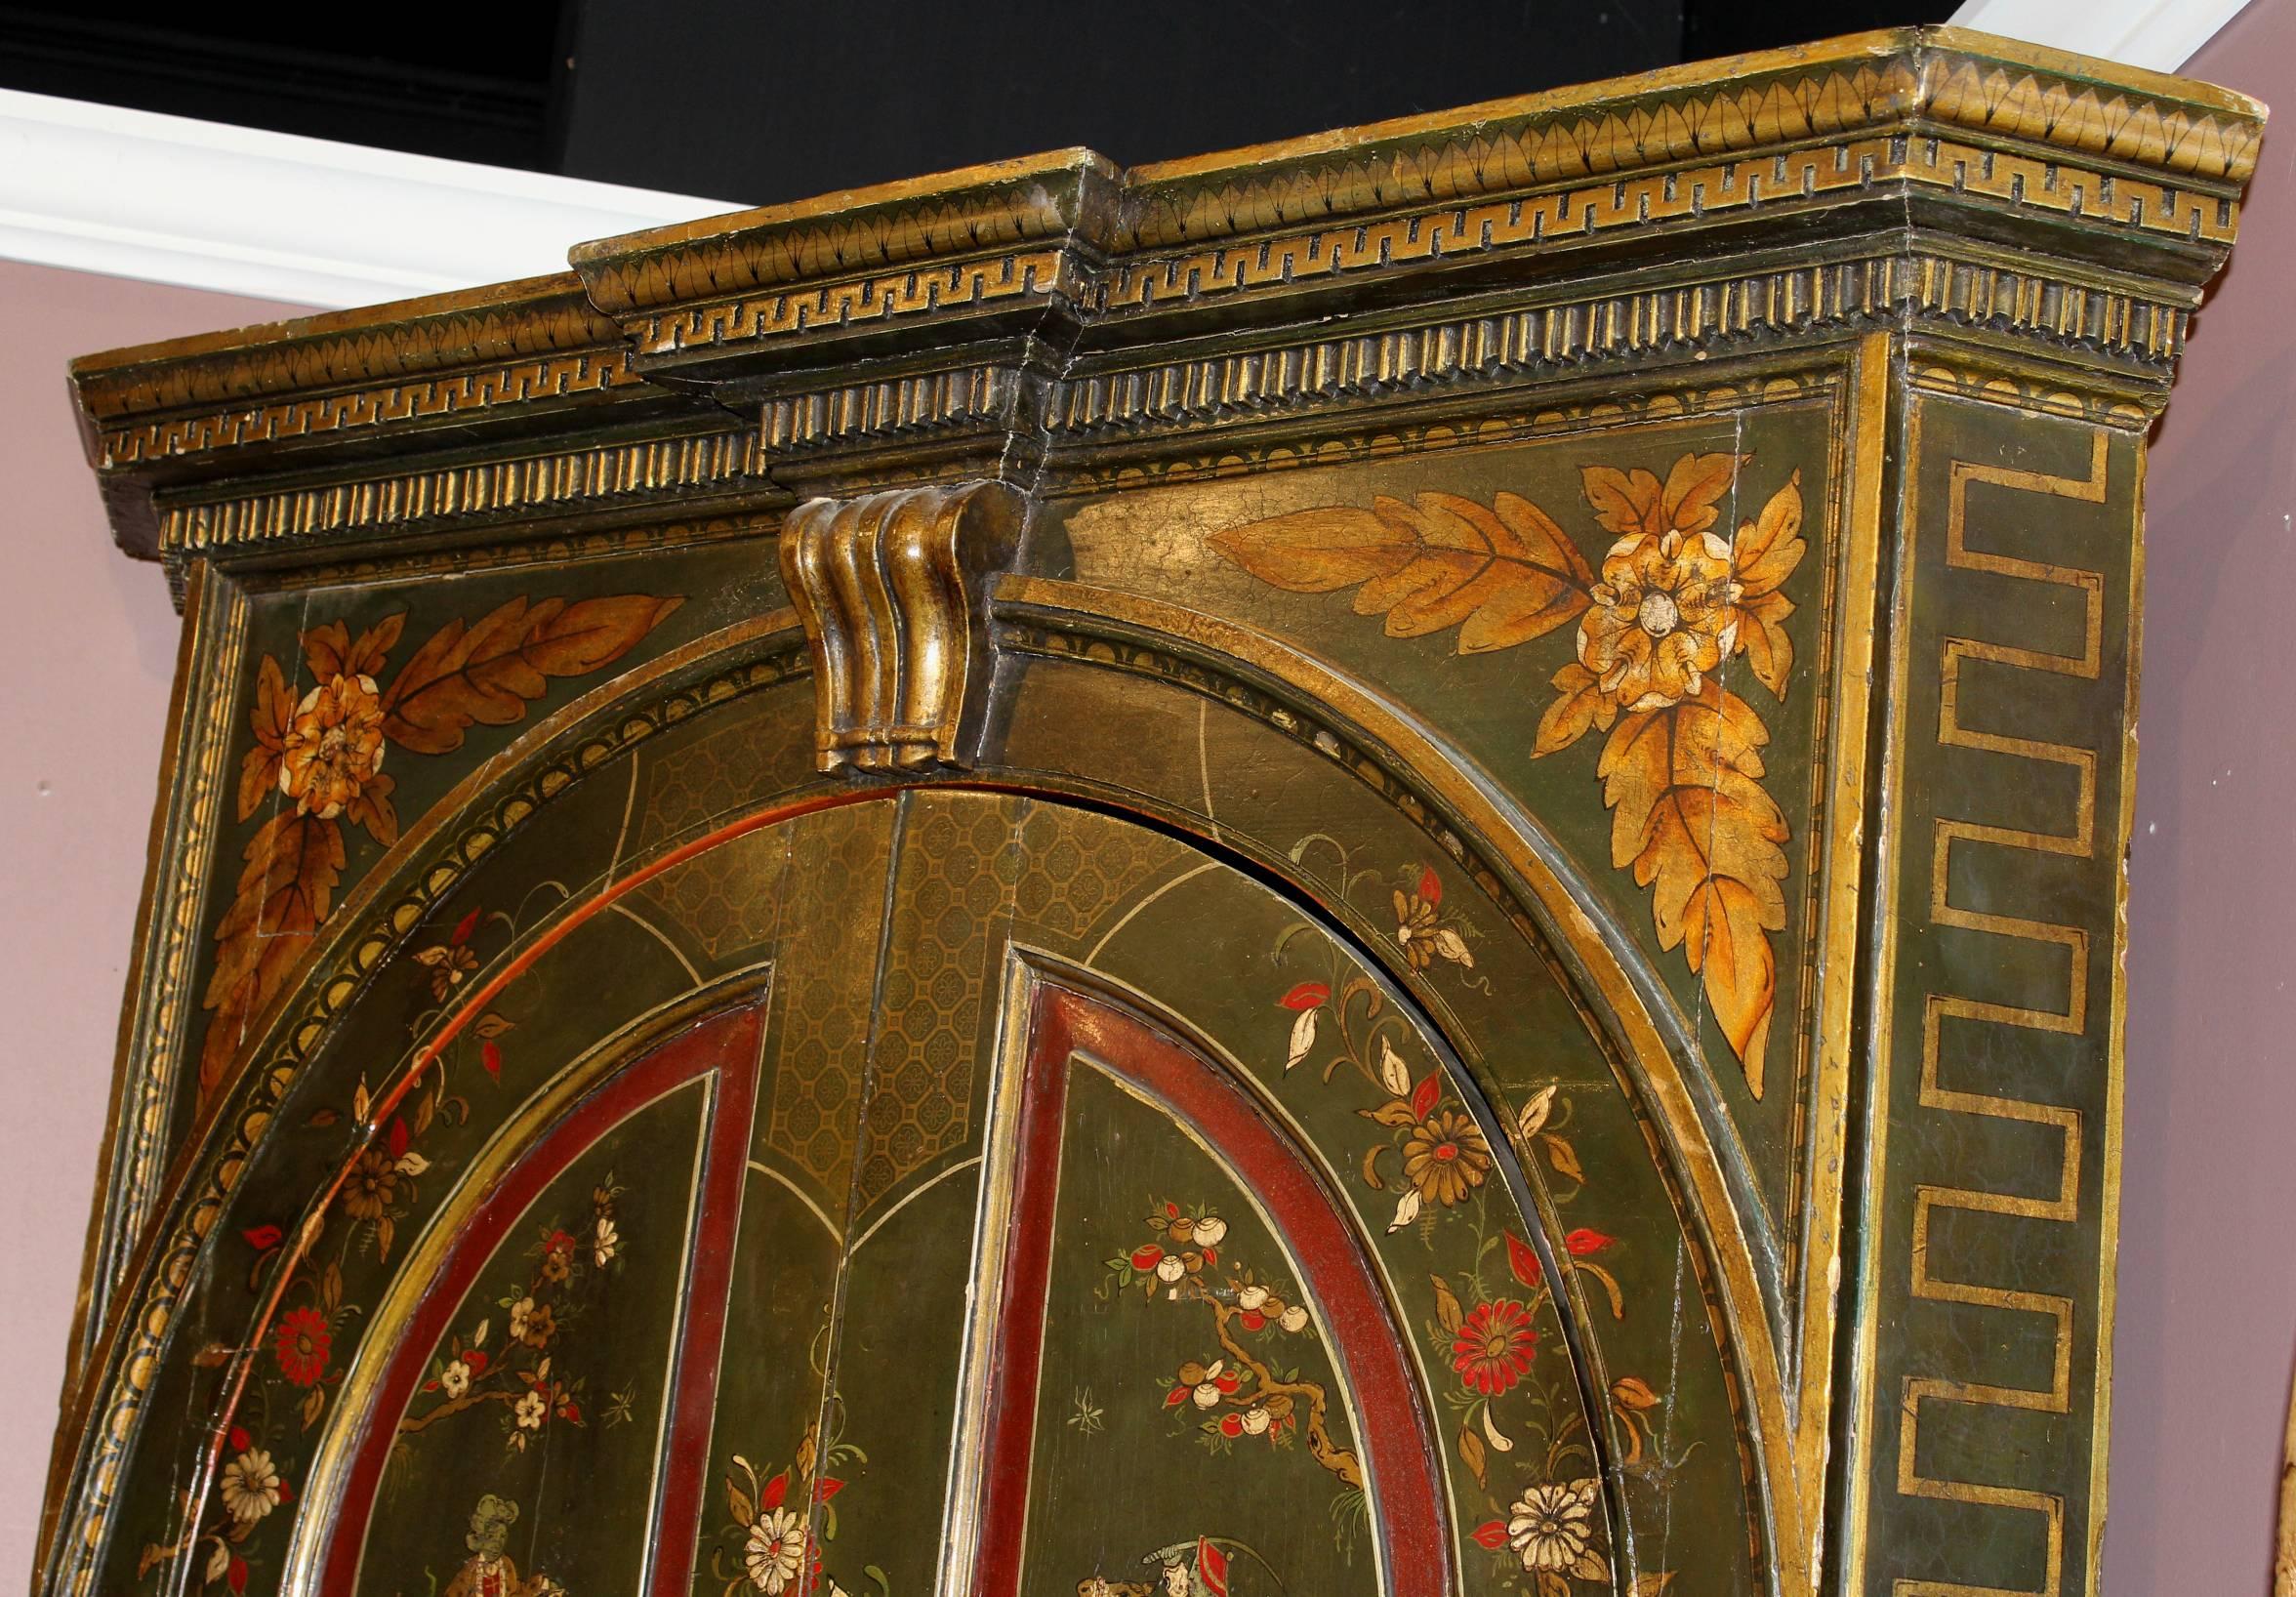 An exceptional George III polychrome two-part corner cupboard with chinoiserie decoration including men on horseback, other walking figures, flowers and birds, primarily in olive green, red, and gilt colors, with a geometric carved cornice, an upper